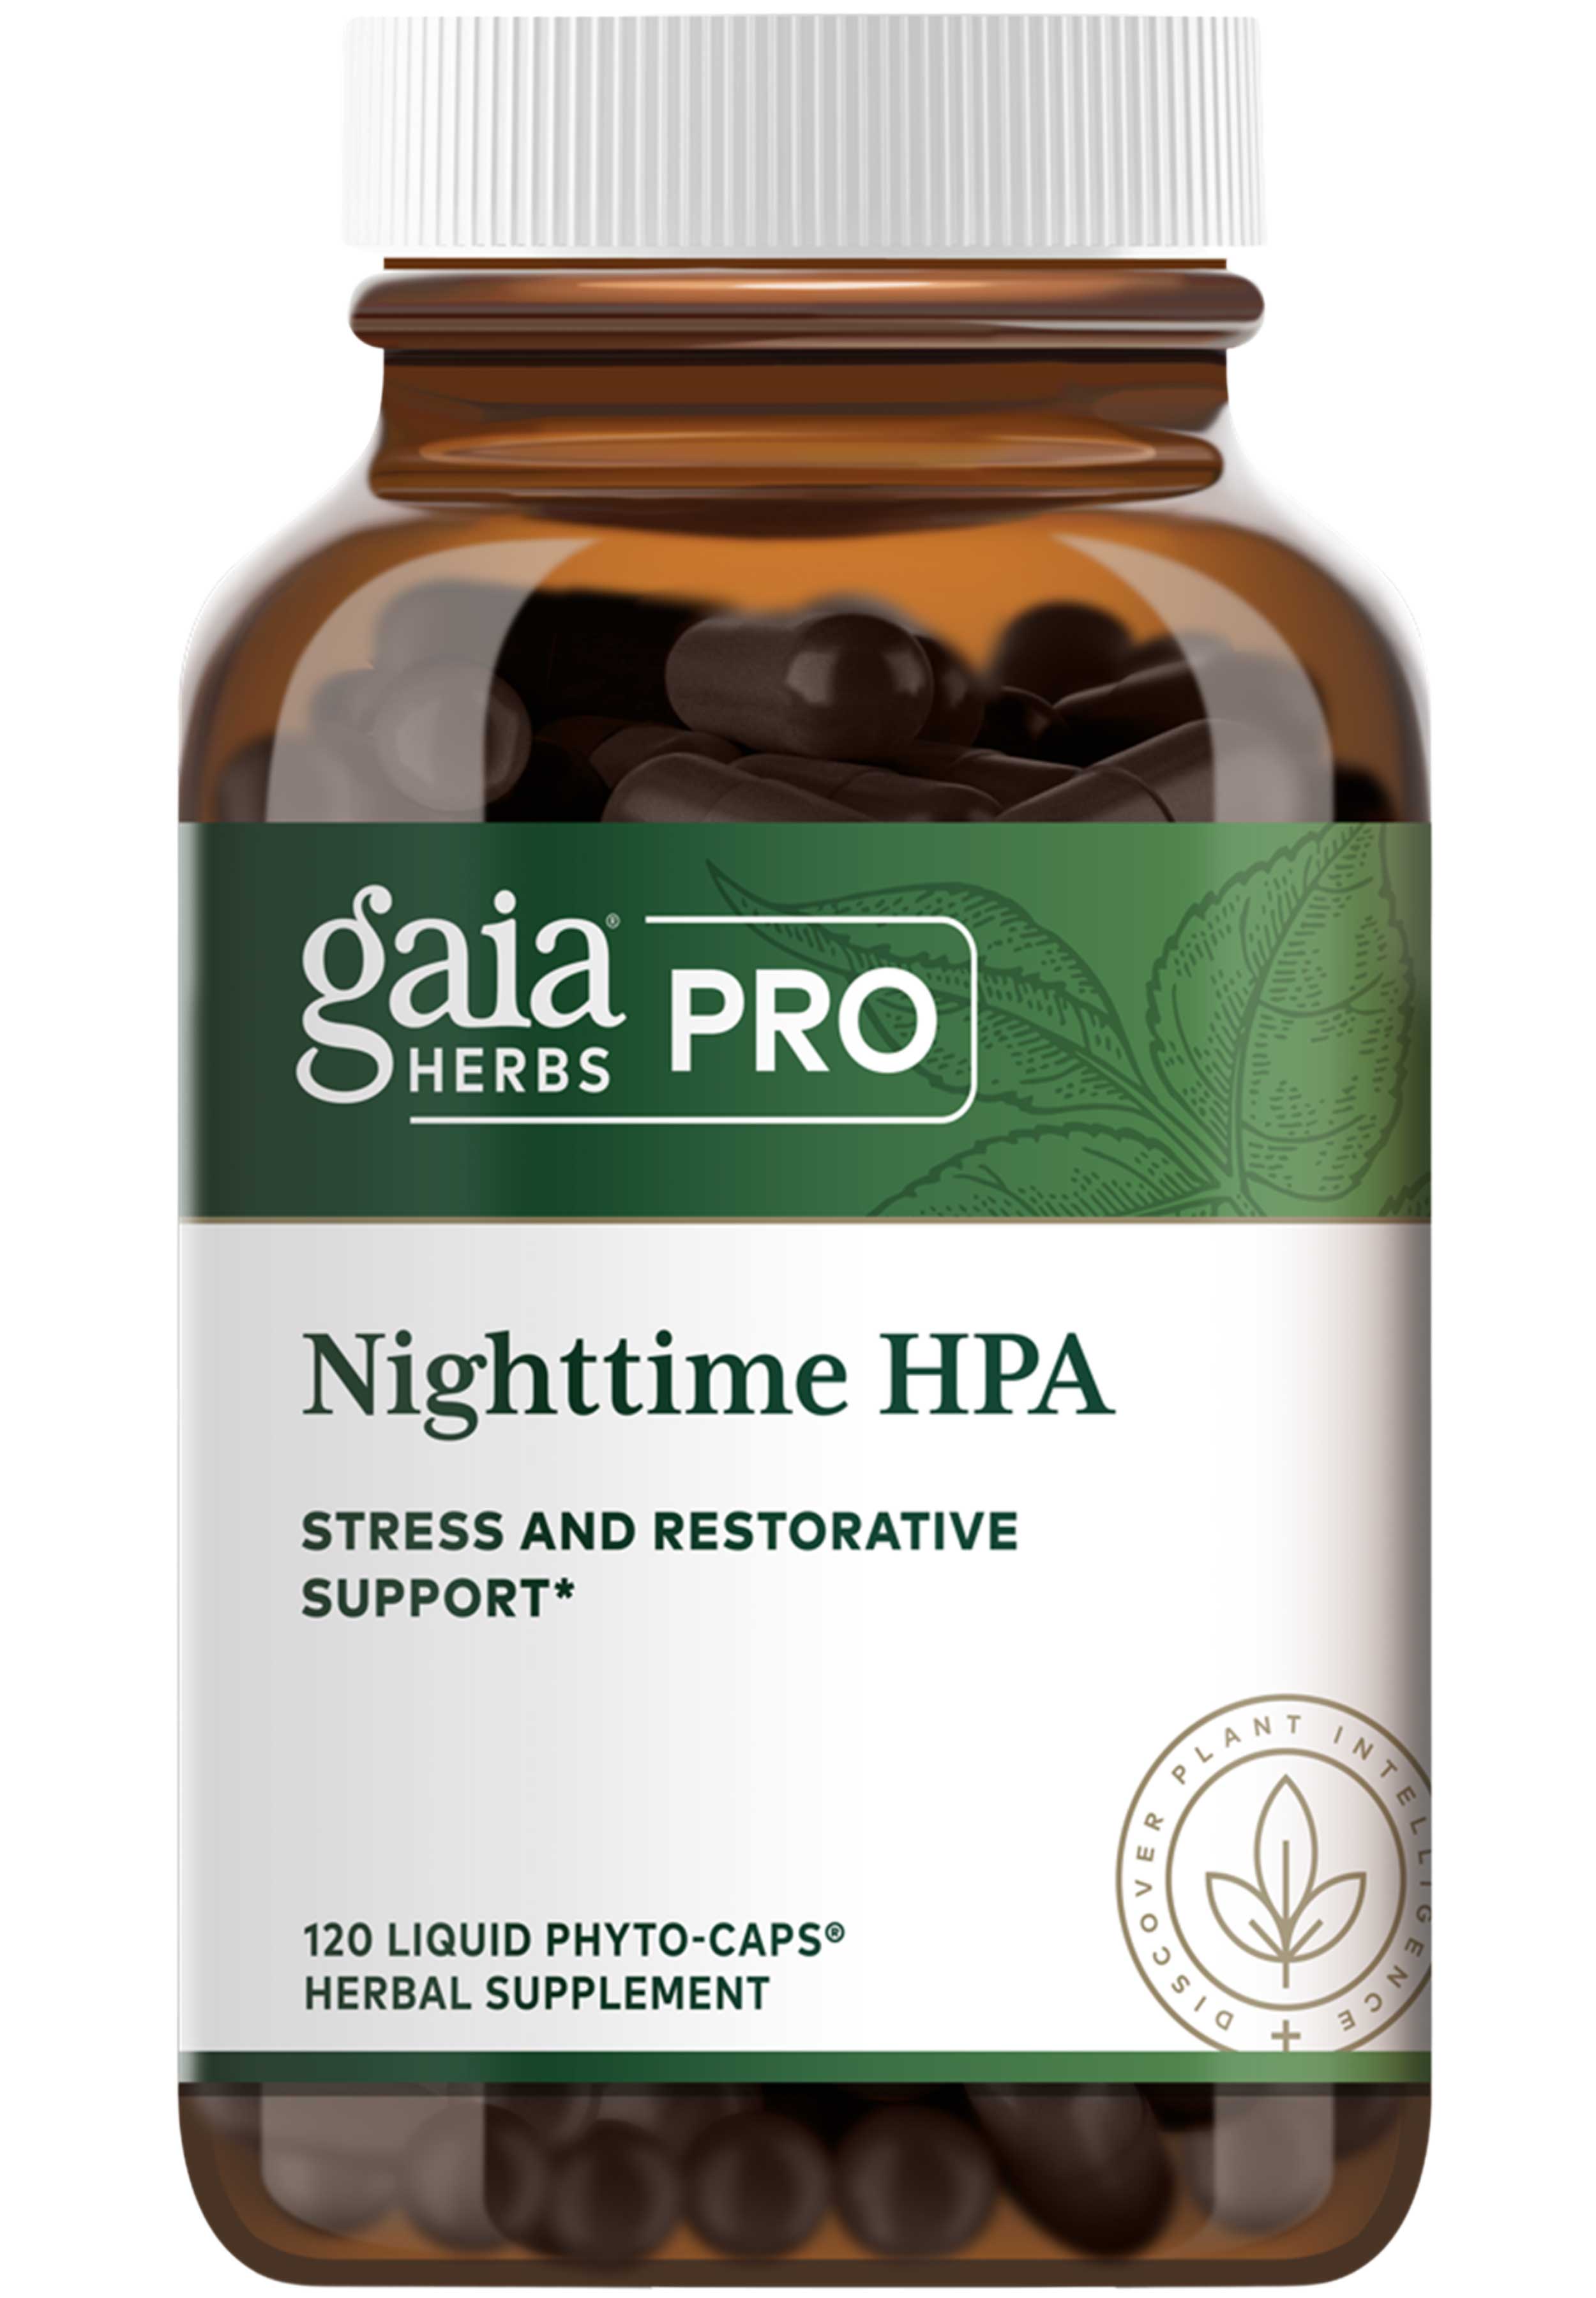 Gaia Herbs Professional Solutions NightTime HPA (Formerly HPA Axis: Sleep Cycle)